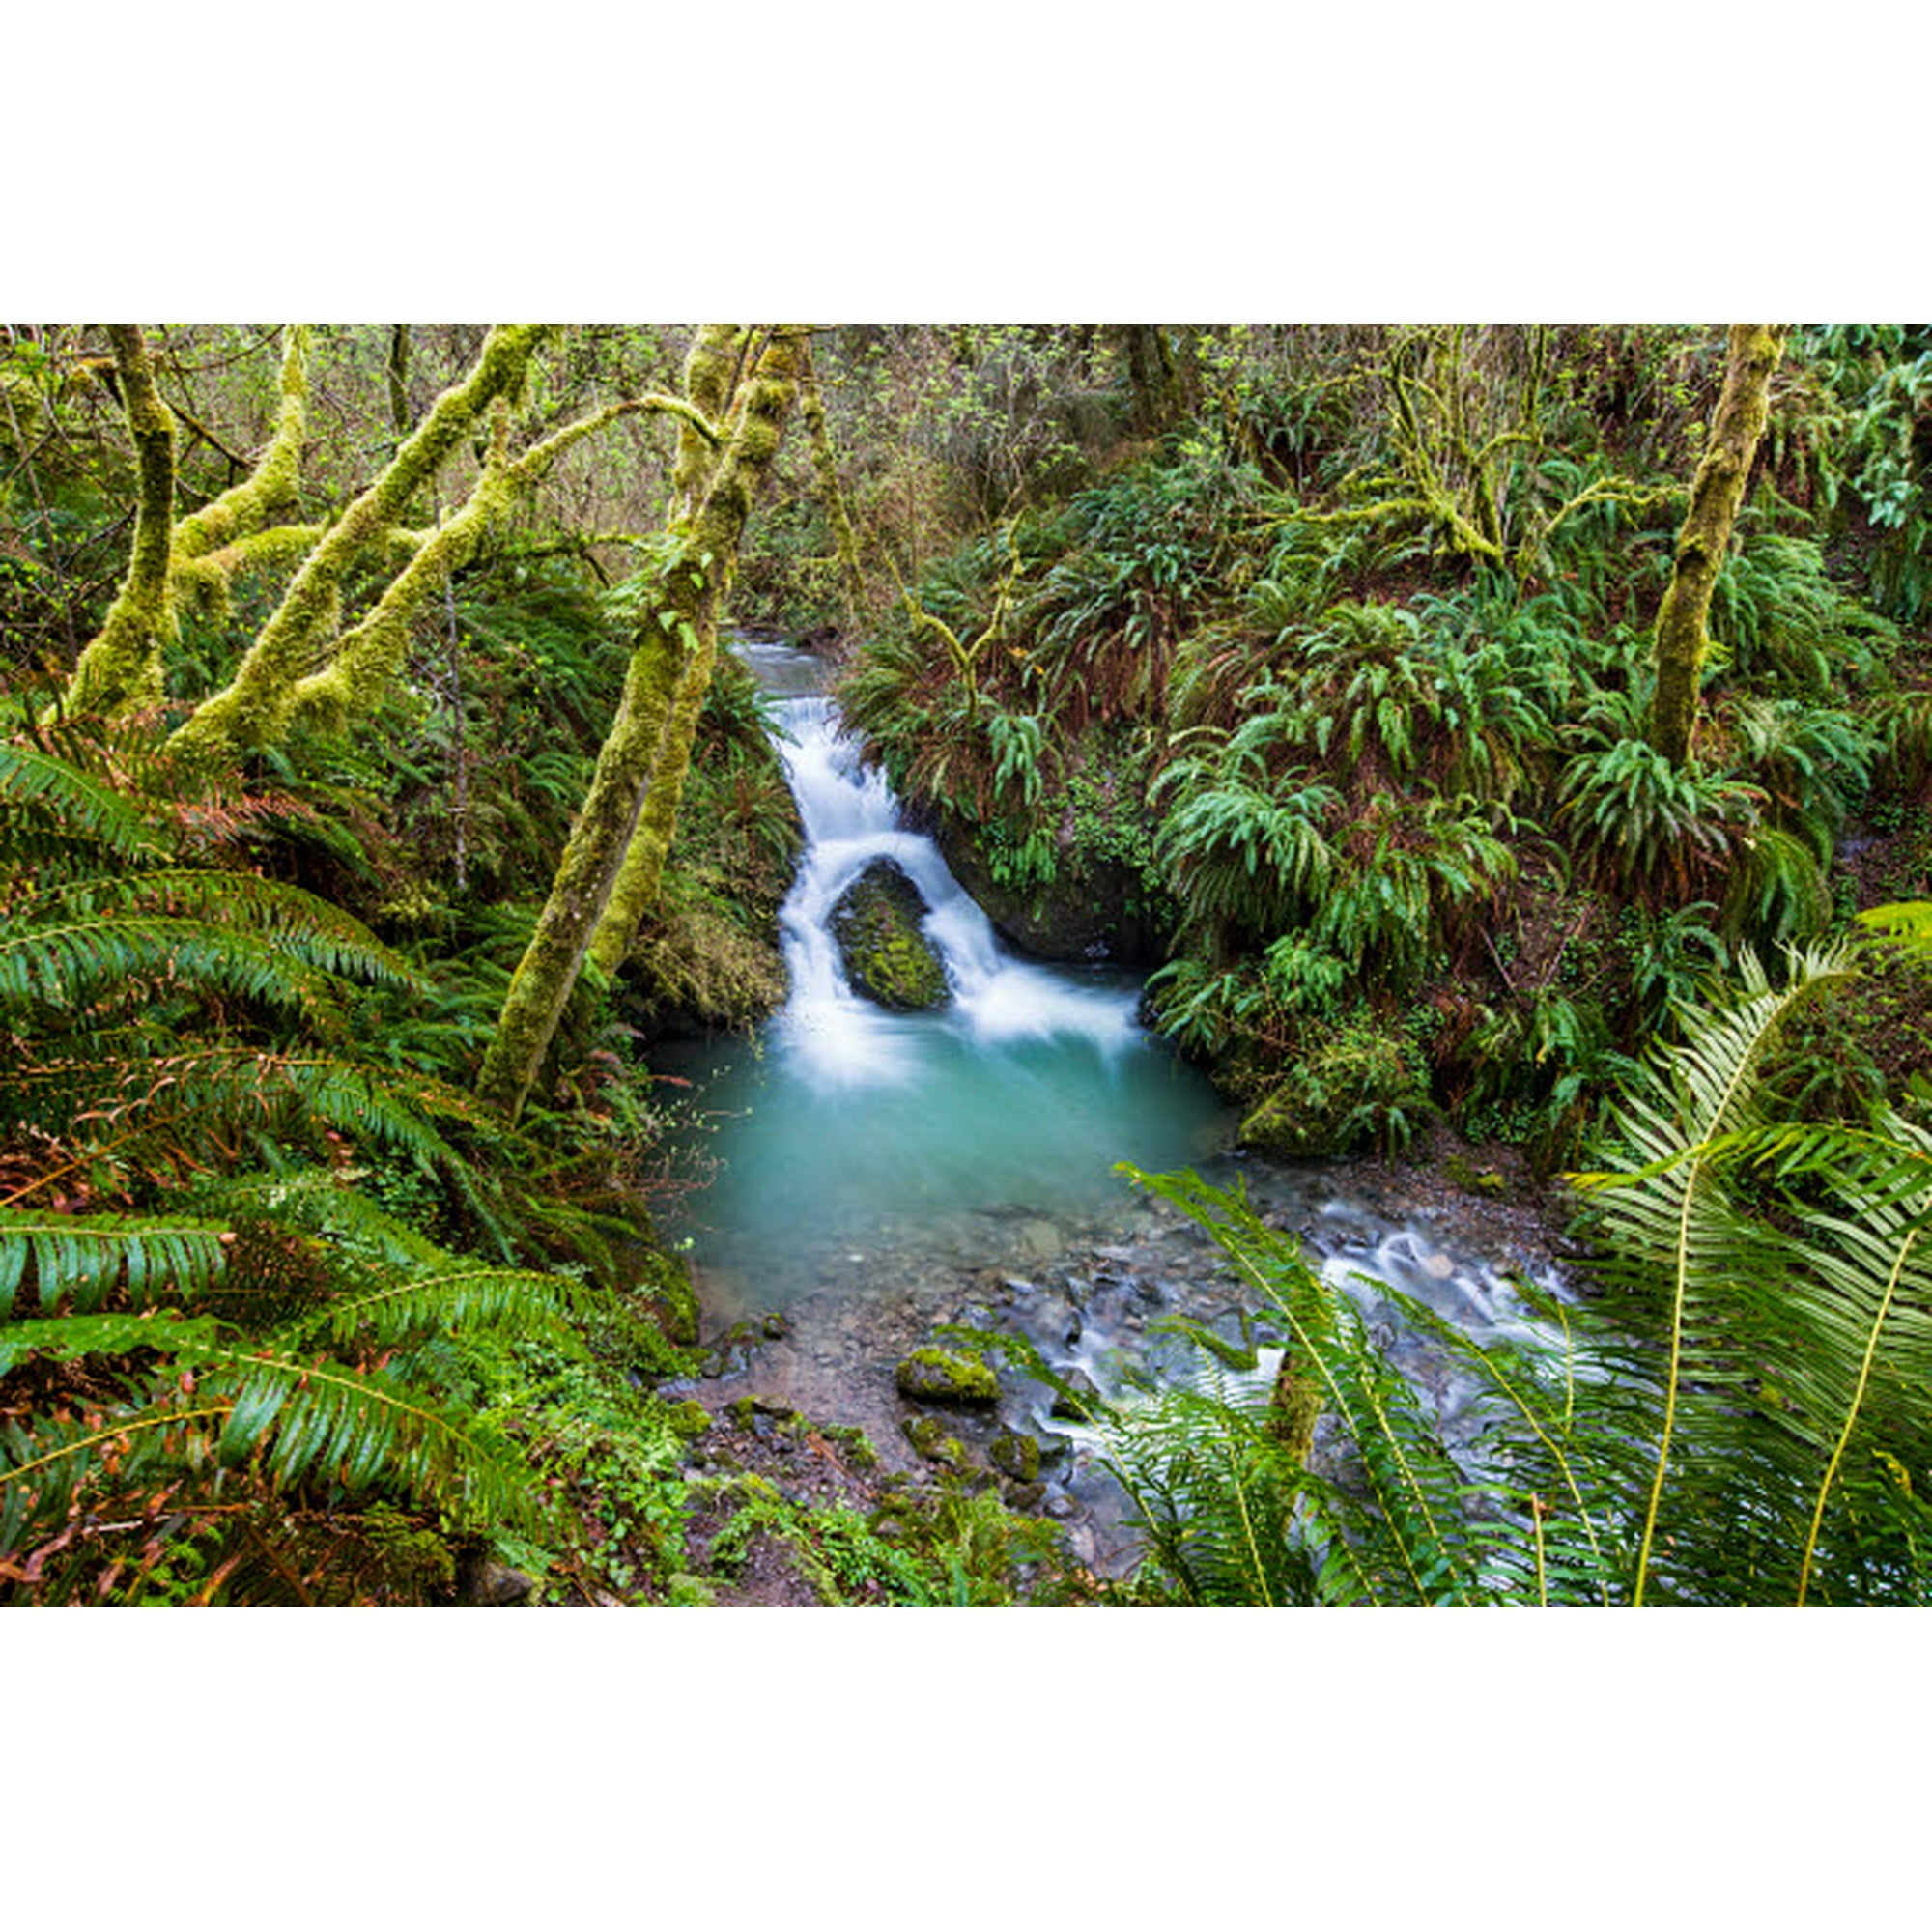 USA, California, Redwoods National Park Stream flows through canopy and  ferns onto Enderts Beach Poster Print by Yuri Choufour (36 x 24) #  US05YCH0001 | Walmart Canada